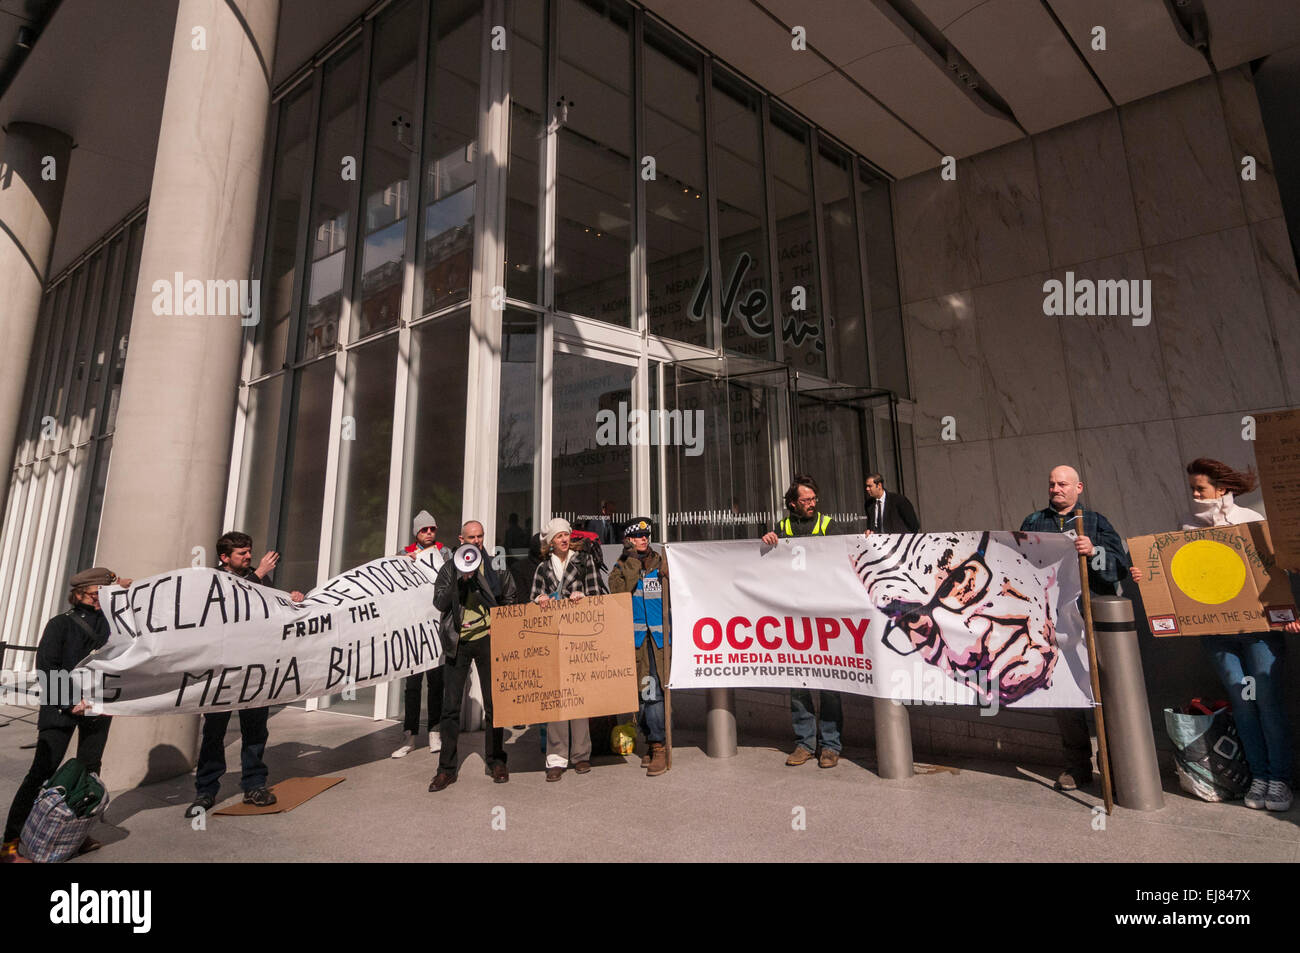 London Bridge Station, London, UK.  23rd March, 2015. Donnachadh McCarthy, Occupy spokesperson, pictured with demonstrators gathering outside News UK's headquarters, 'the Little Shard' near London Bridge as part of the Occupy Rupert Murdoch protest.  The protest is against the dominance of billionaire owners of UK media: Rupert Murdoch (News UK), Viscount Rothermere (Daily Mail Group), Richard Desmond (The Express) and the Barclay brothers (Telegraph). Credit:  Stephen Chung/Alamy Live News Stock Photo